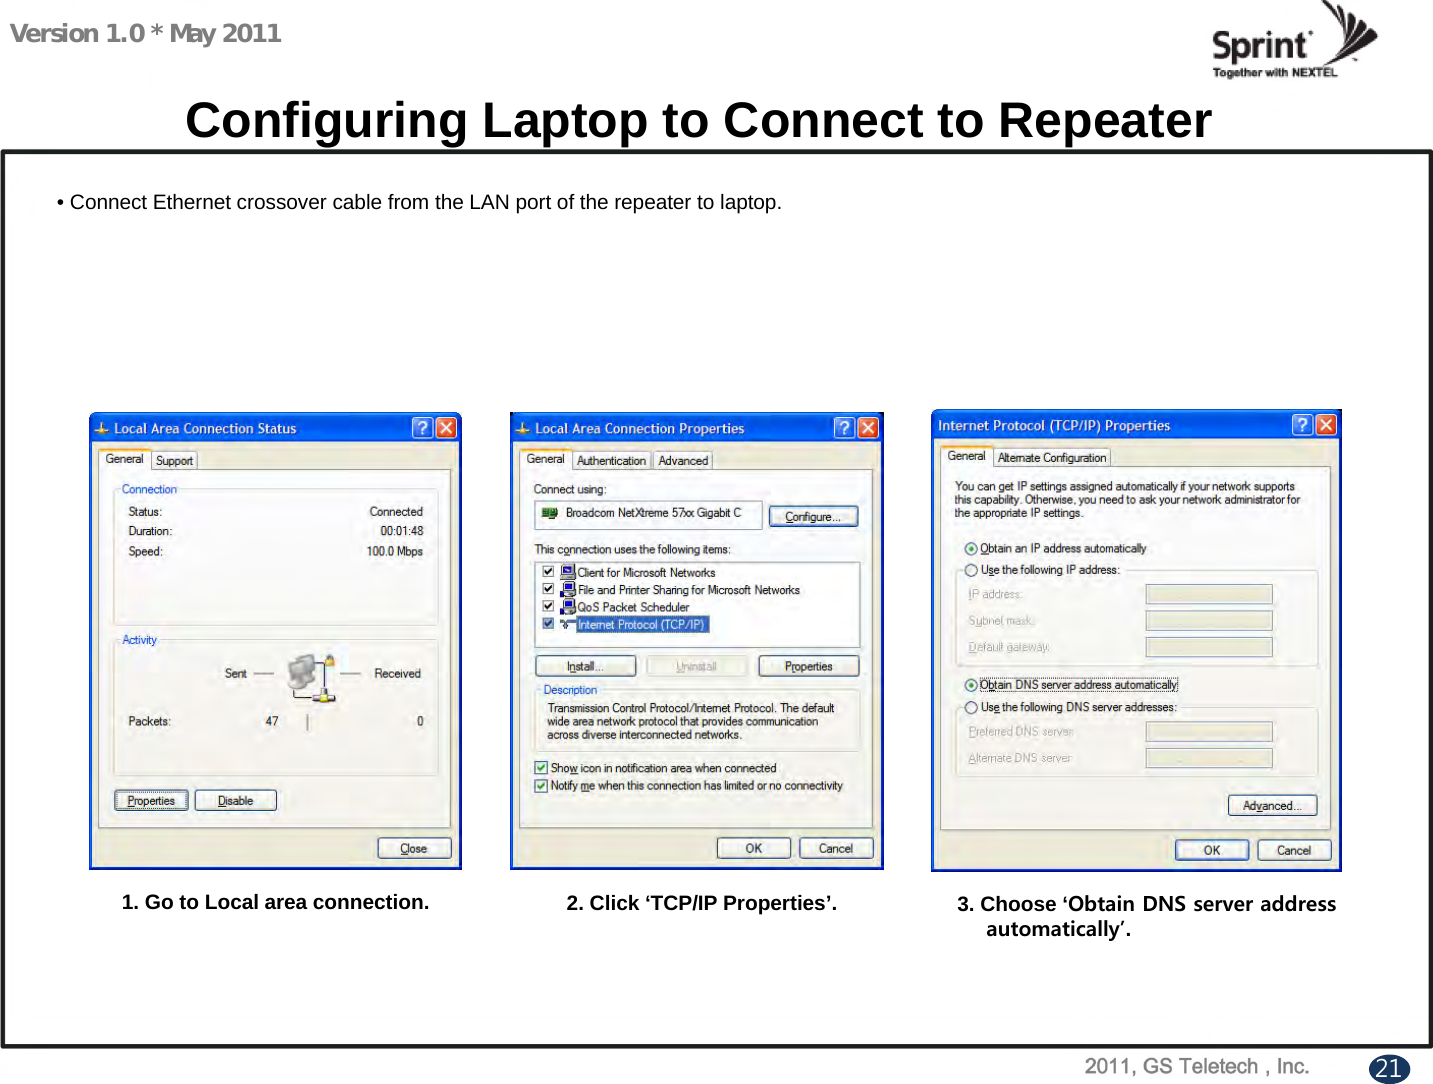 Version 1.0 * May 2011Configuring Laptop to Connect to Repeater1. Go to Local area connection. 2. Click ‘TCP/IP Properties’. 3. Choose ‘Obtain DNS server addressautomatically’.21• Connect Ethernet crossover cable from the LAN port of the repeater to laptop. 